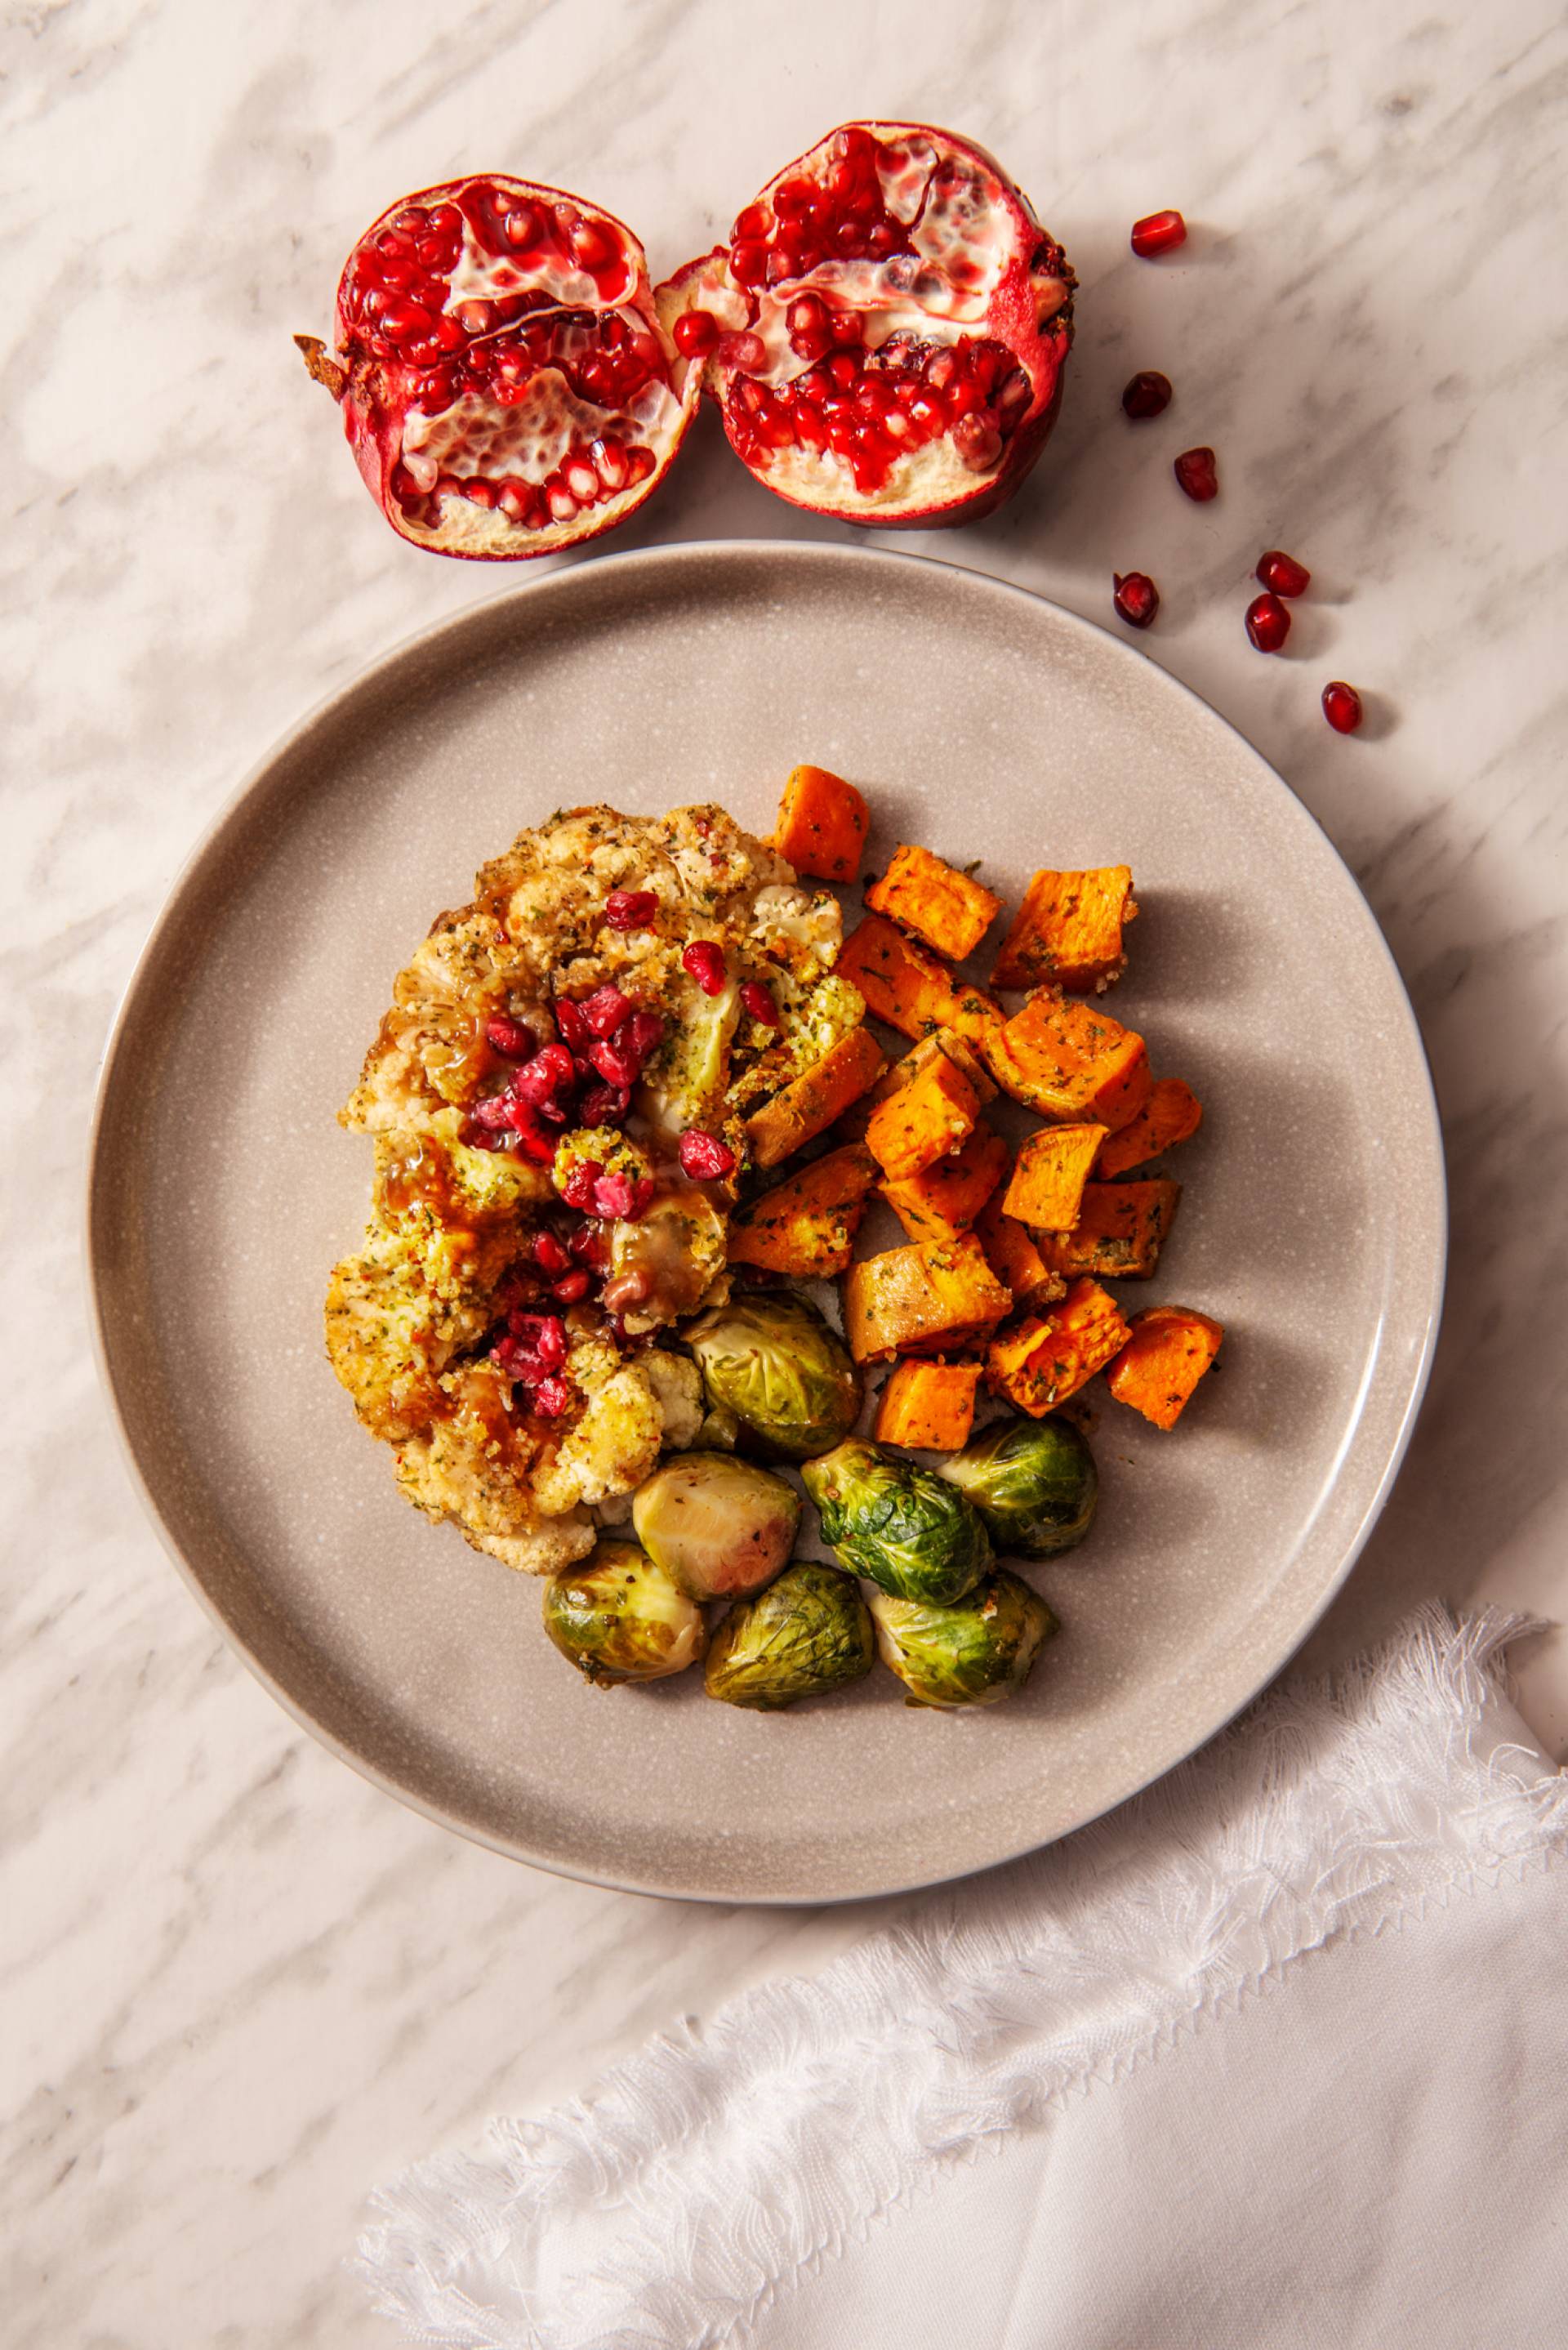 Crusted Cauliflower Steak with Pomegranate Sauce (MEAT FREE)